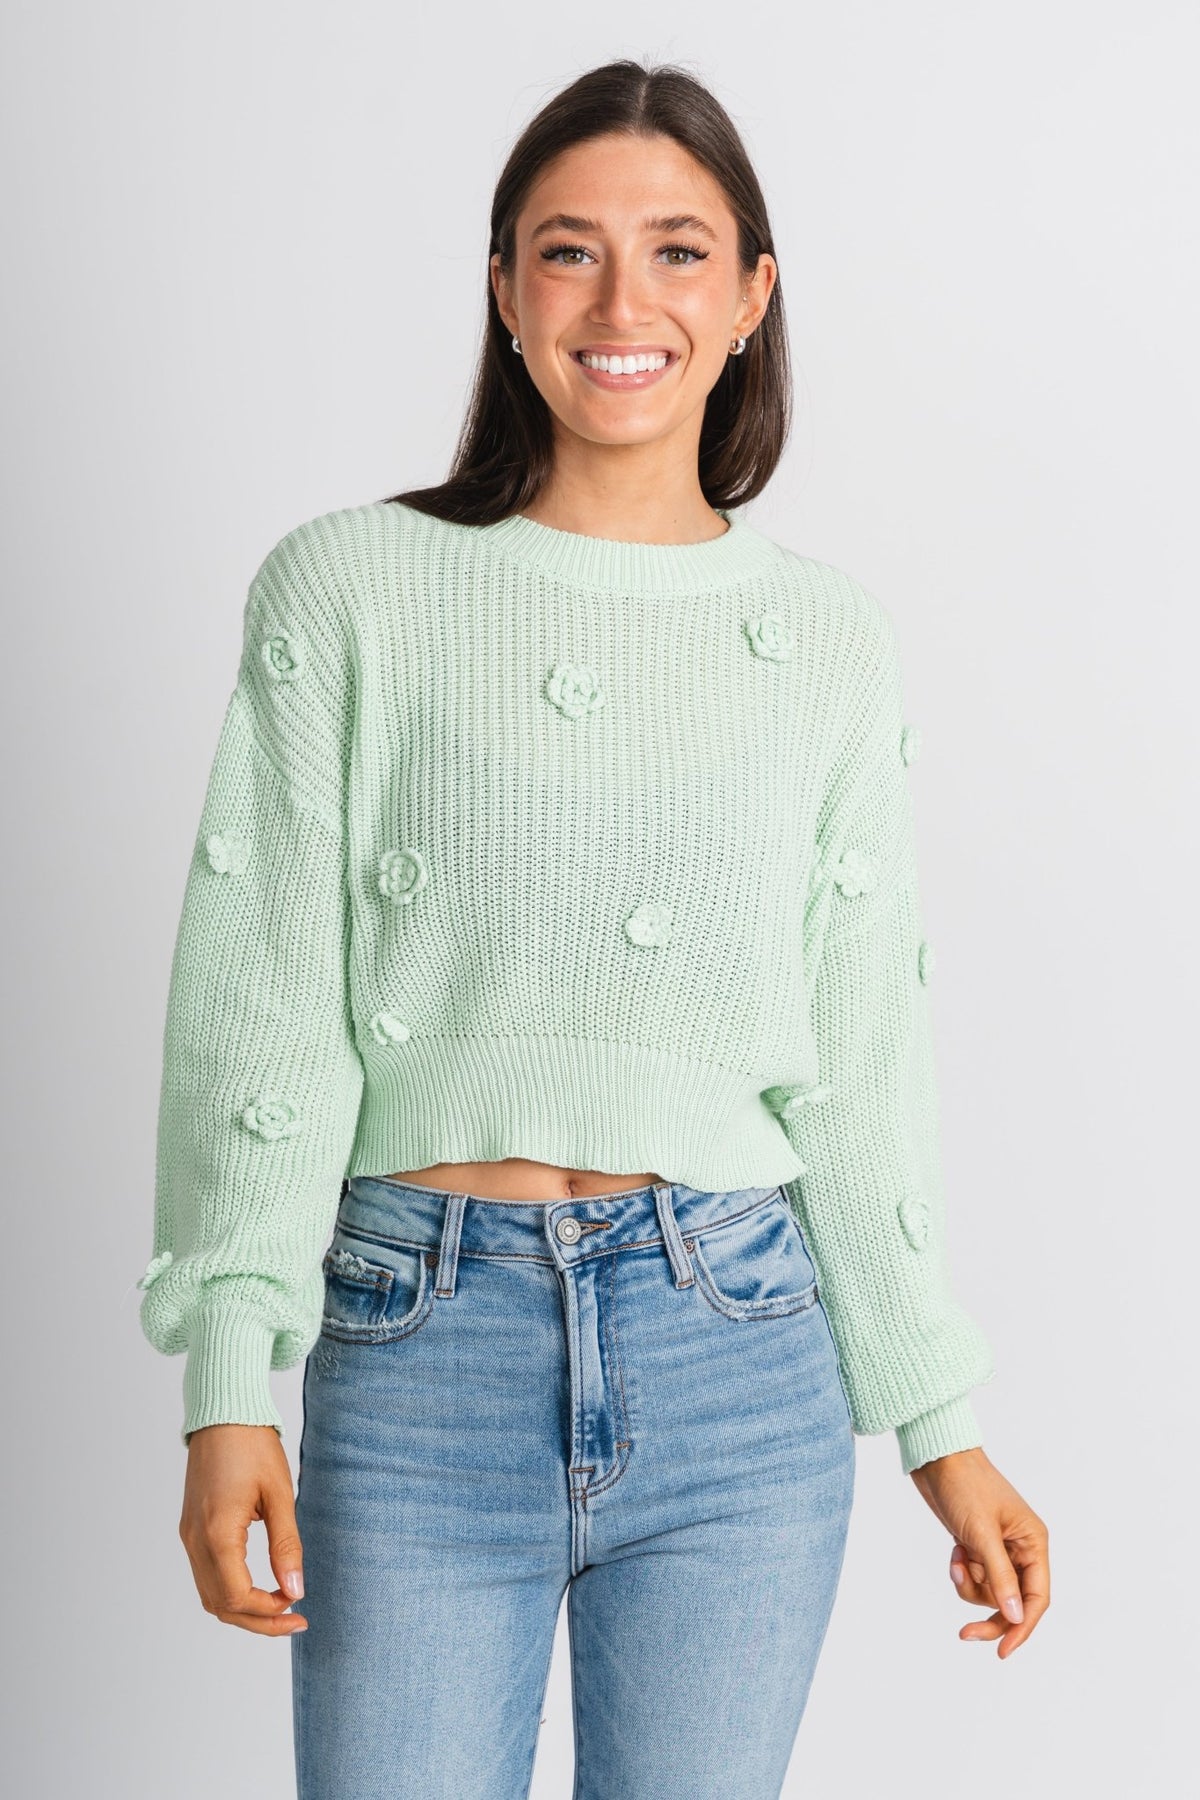 Flower detail sweater mint - Stylish sweater vest - Cute Easter Outfits at Lush Fashion Lounge Boutique in Oklahoma